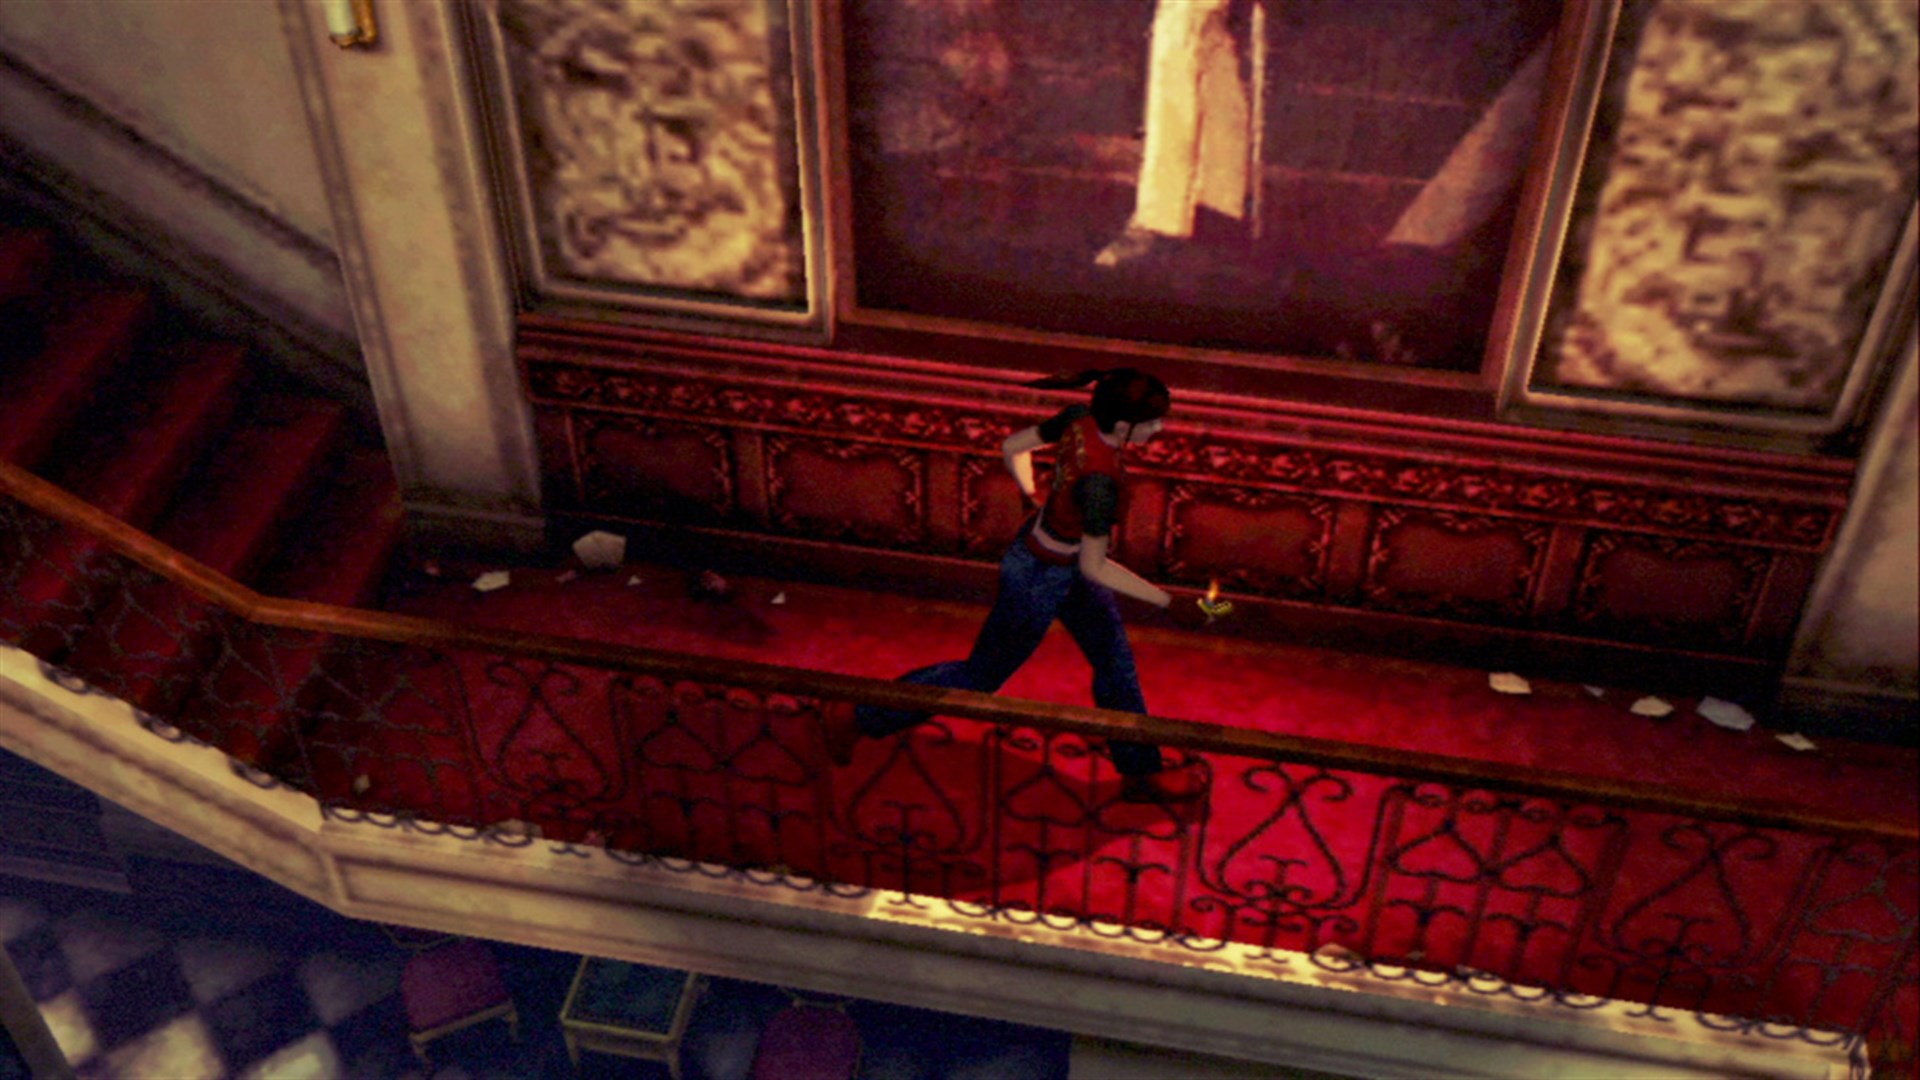 Resident Evil: Code Veronica X - gallery puzzle 